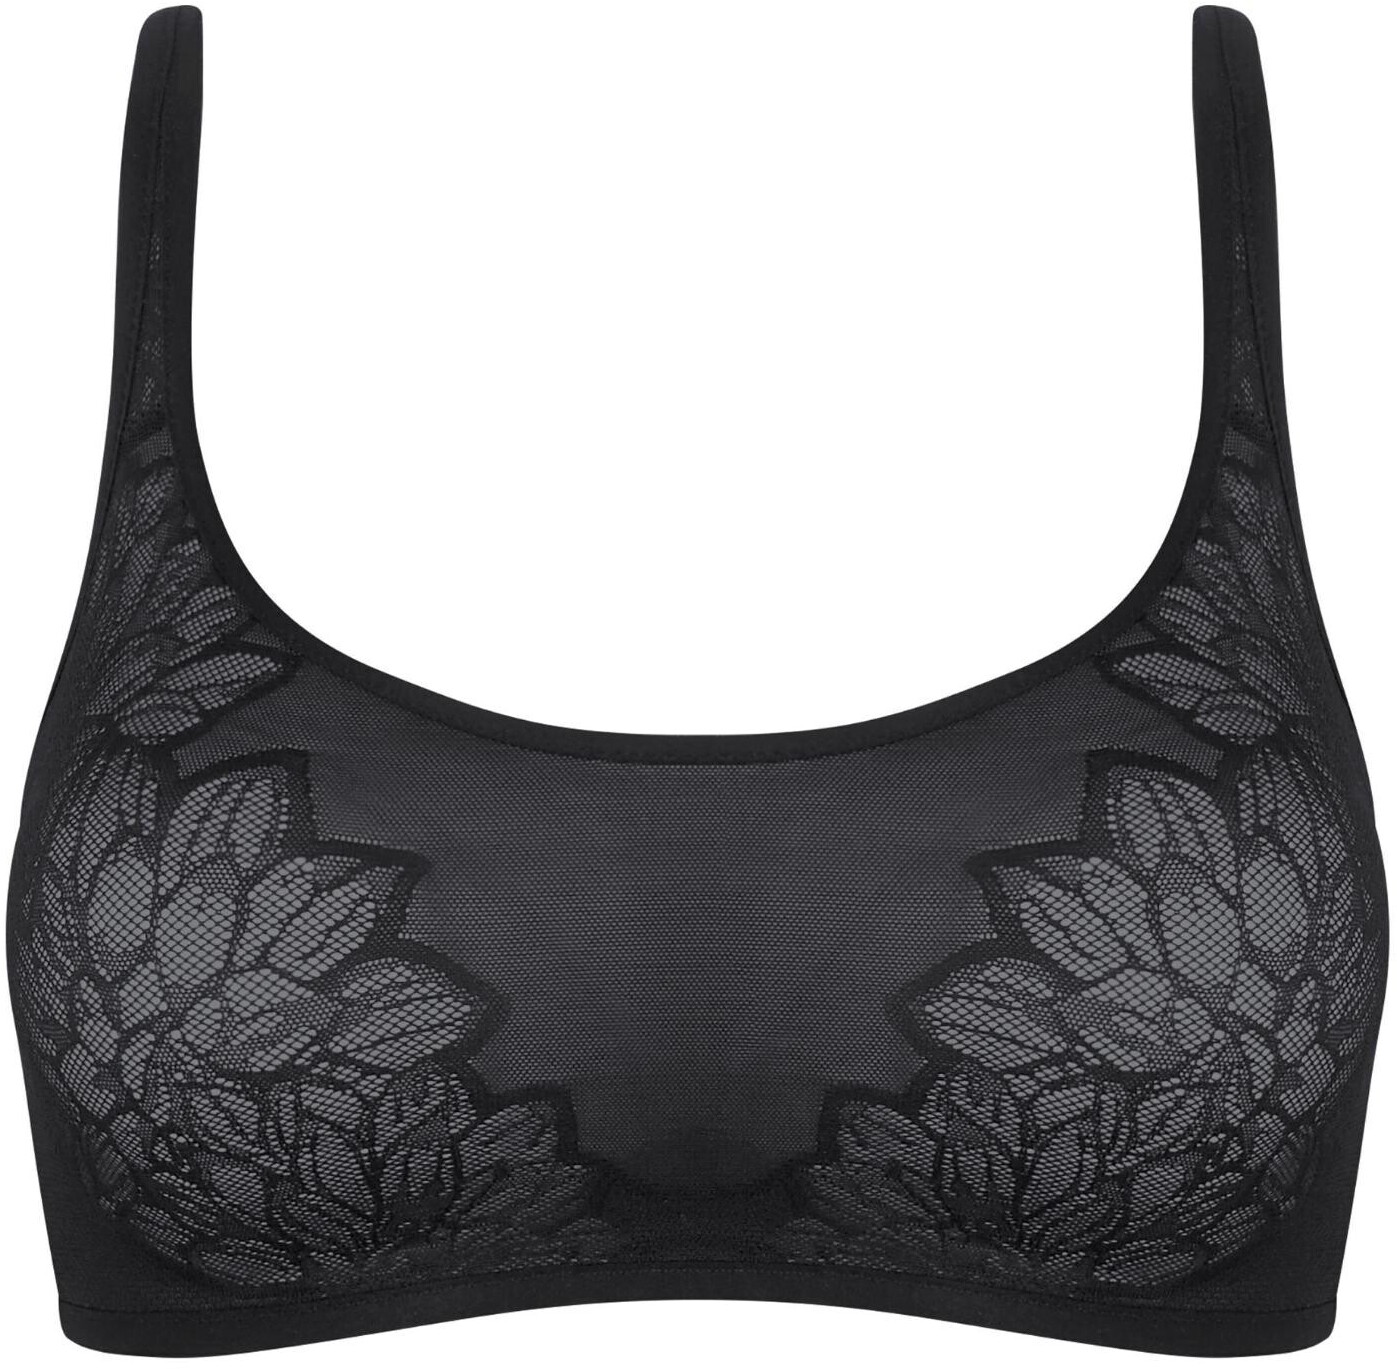 Buy Triumph Fit Smart Padded Bra from £15.14 (Today) – Best Deals on